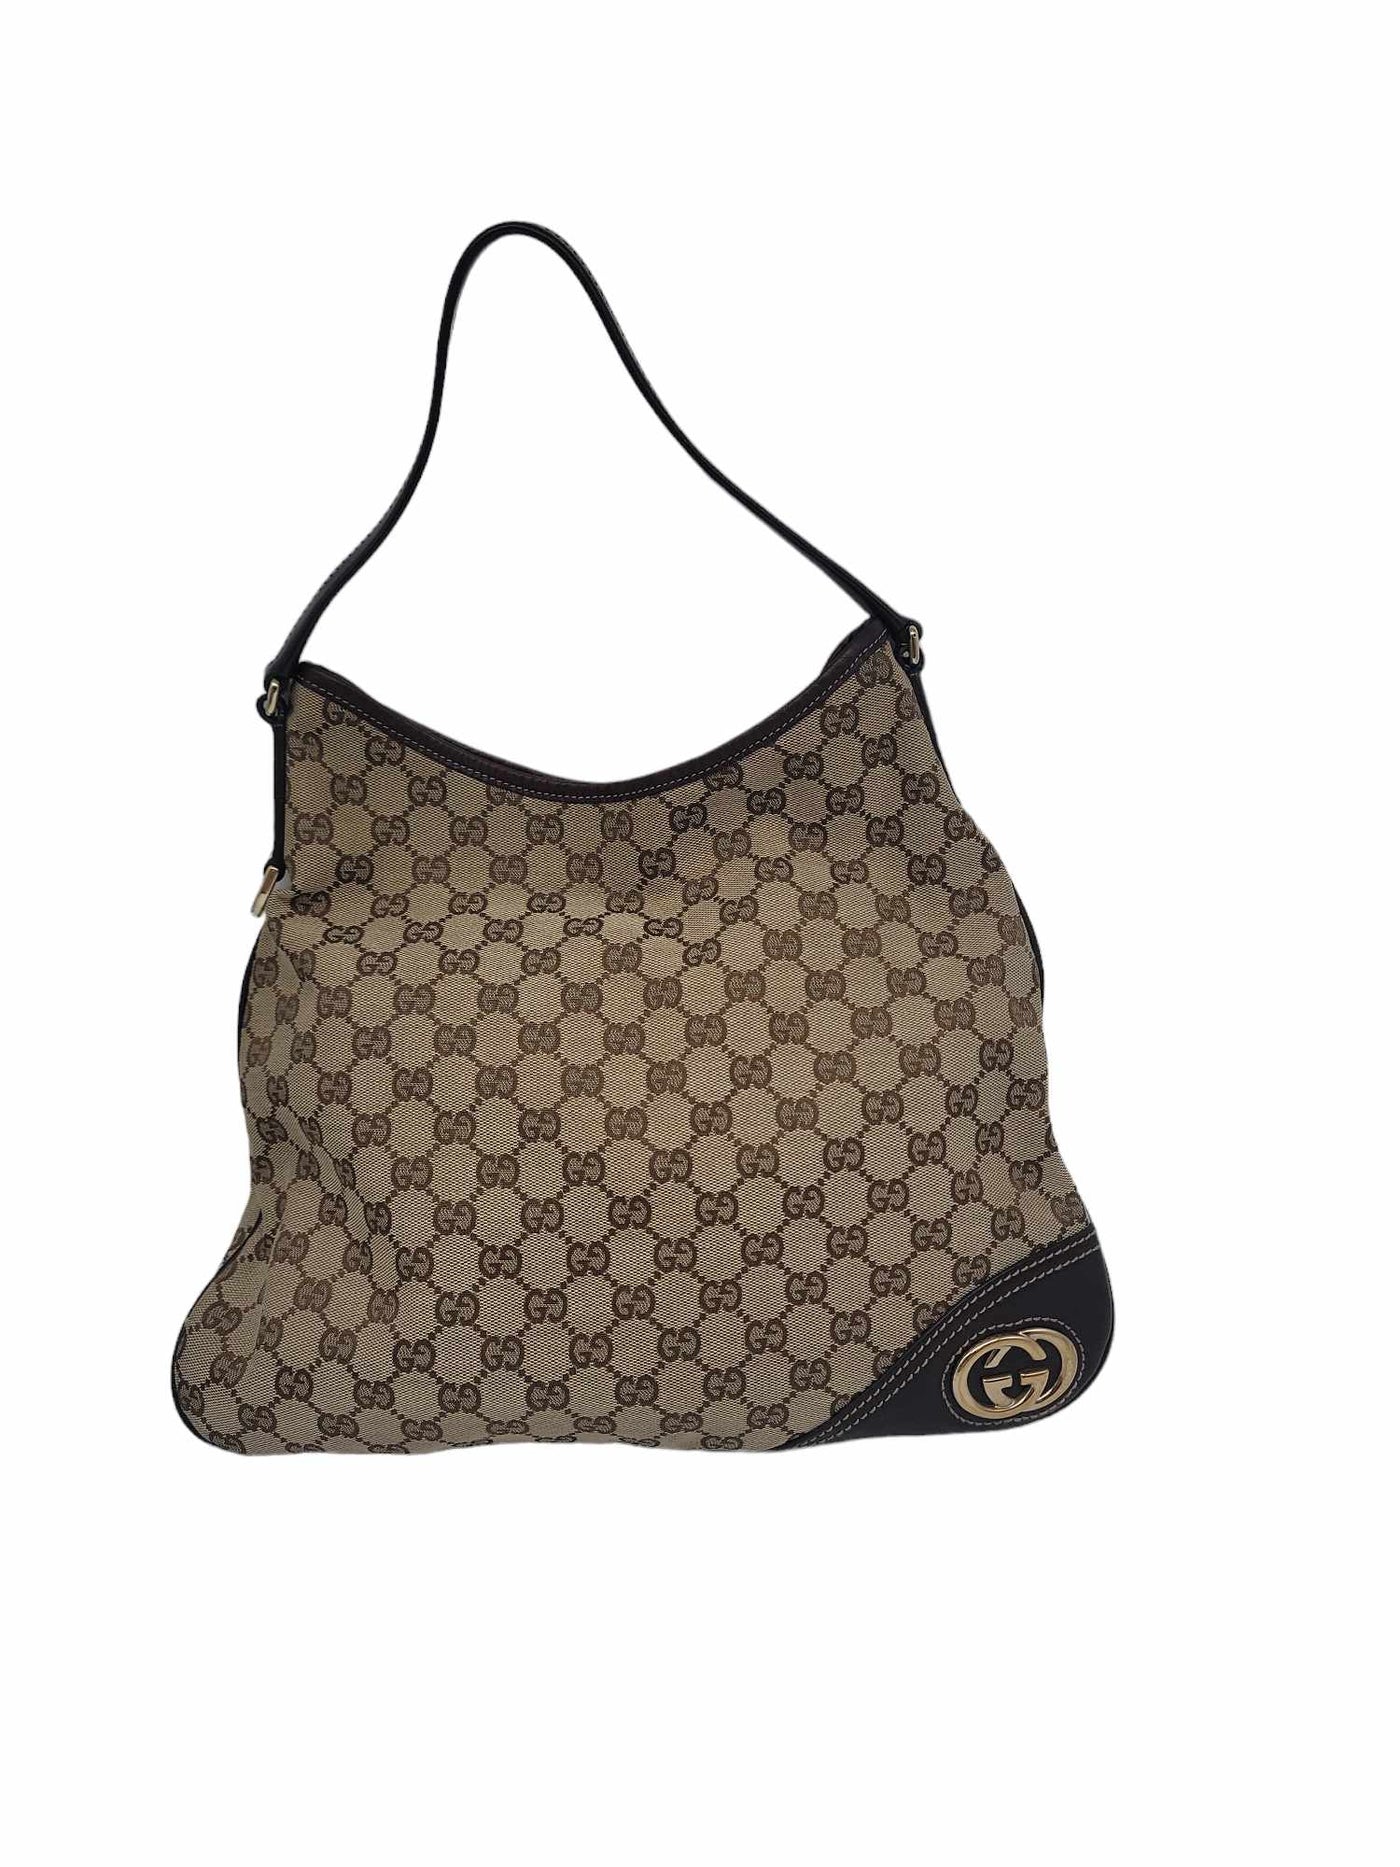 Gucci Brown/Beige GG Canvas and Leather Trim New Britt Hobo